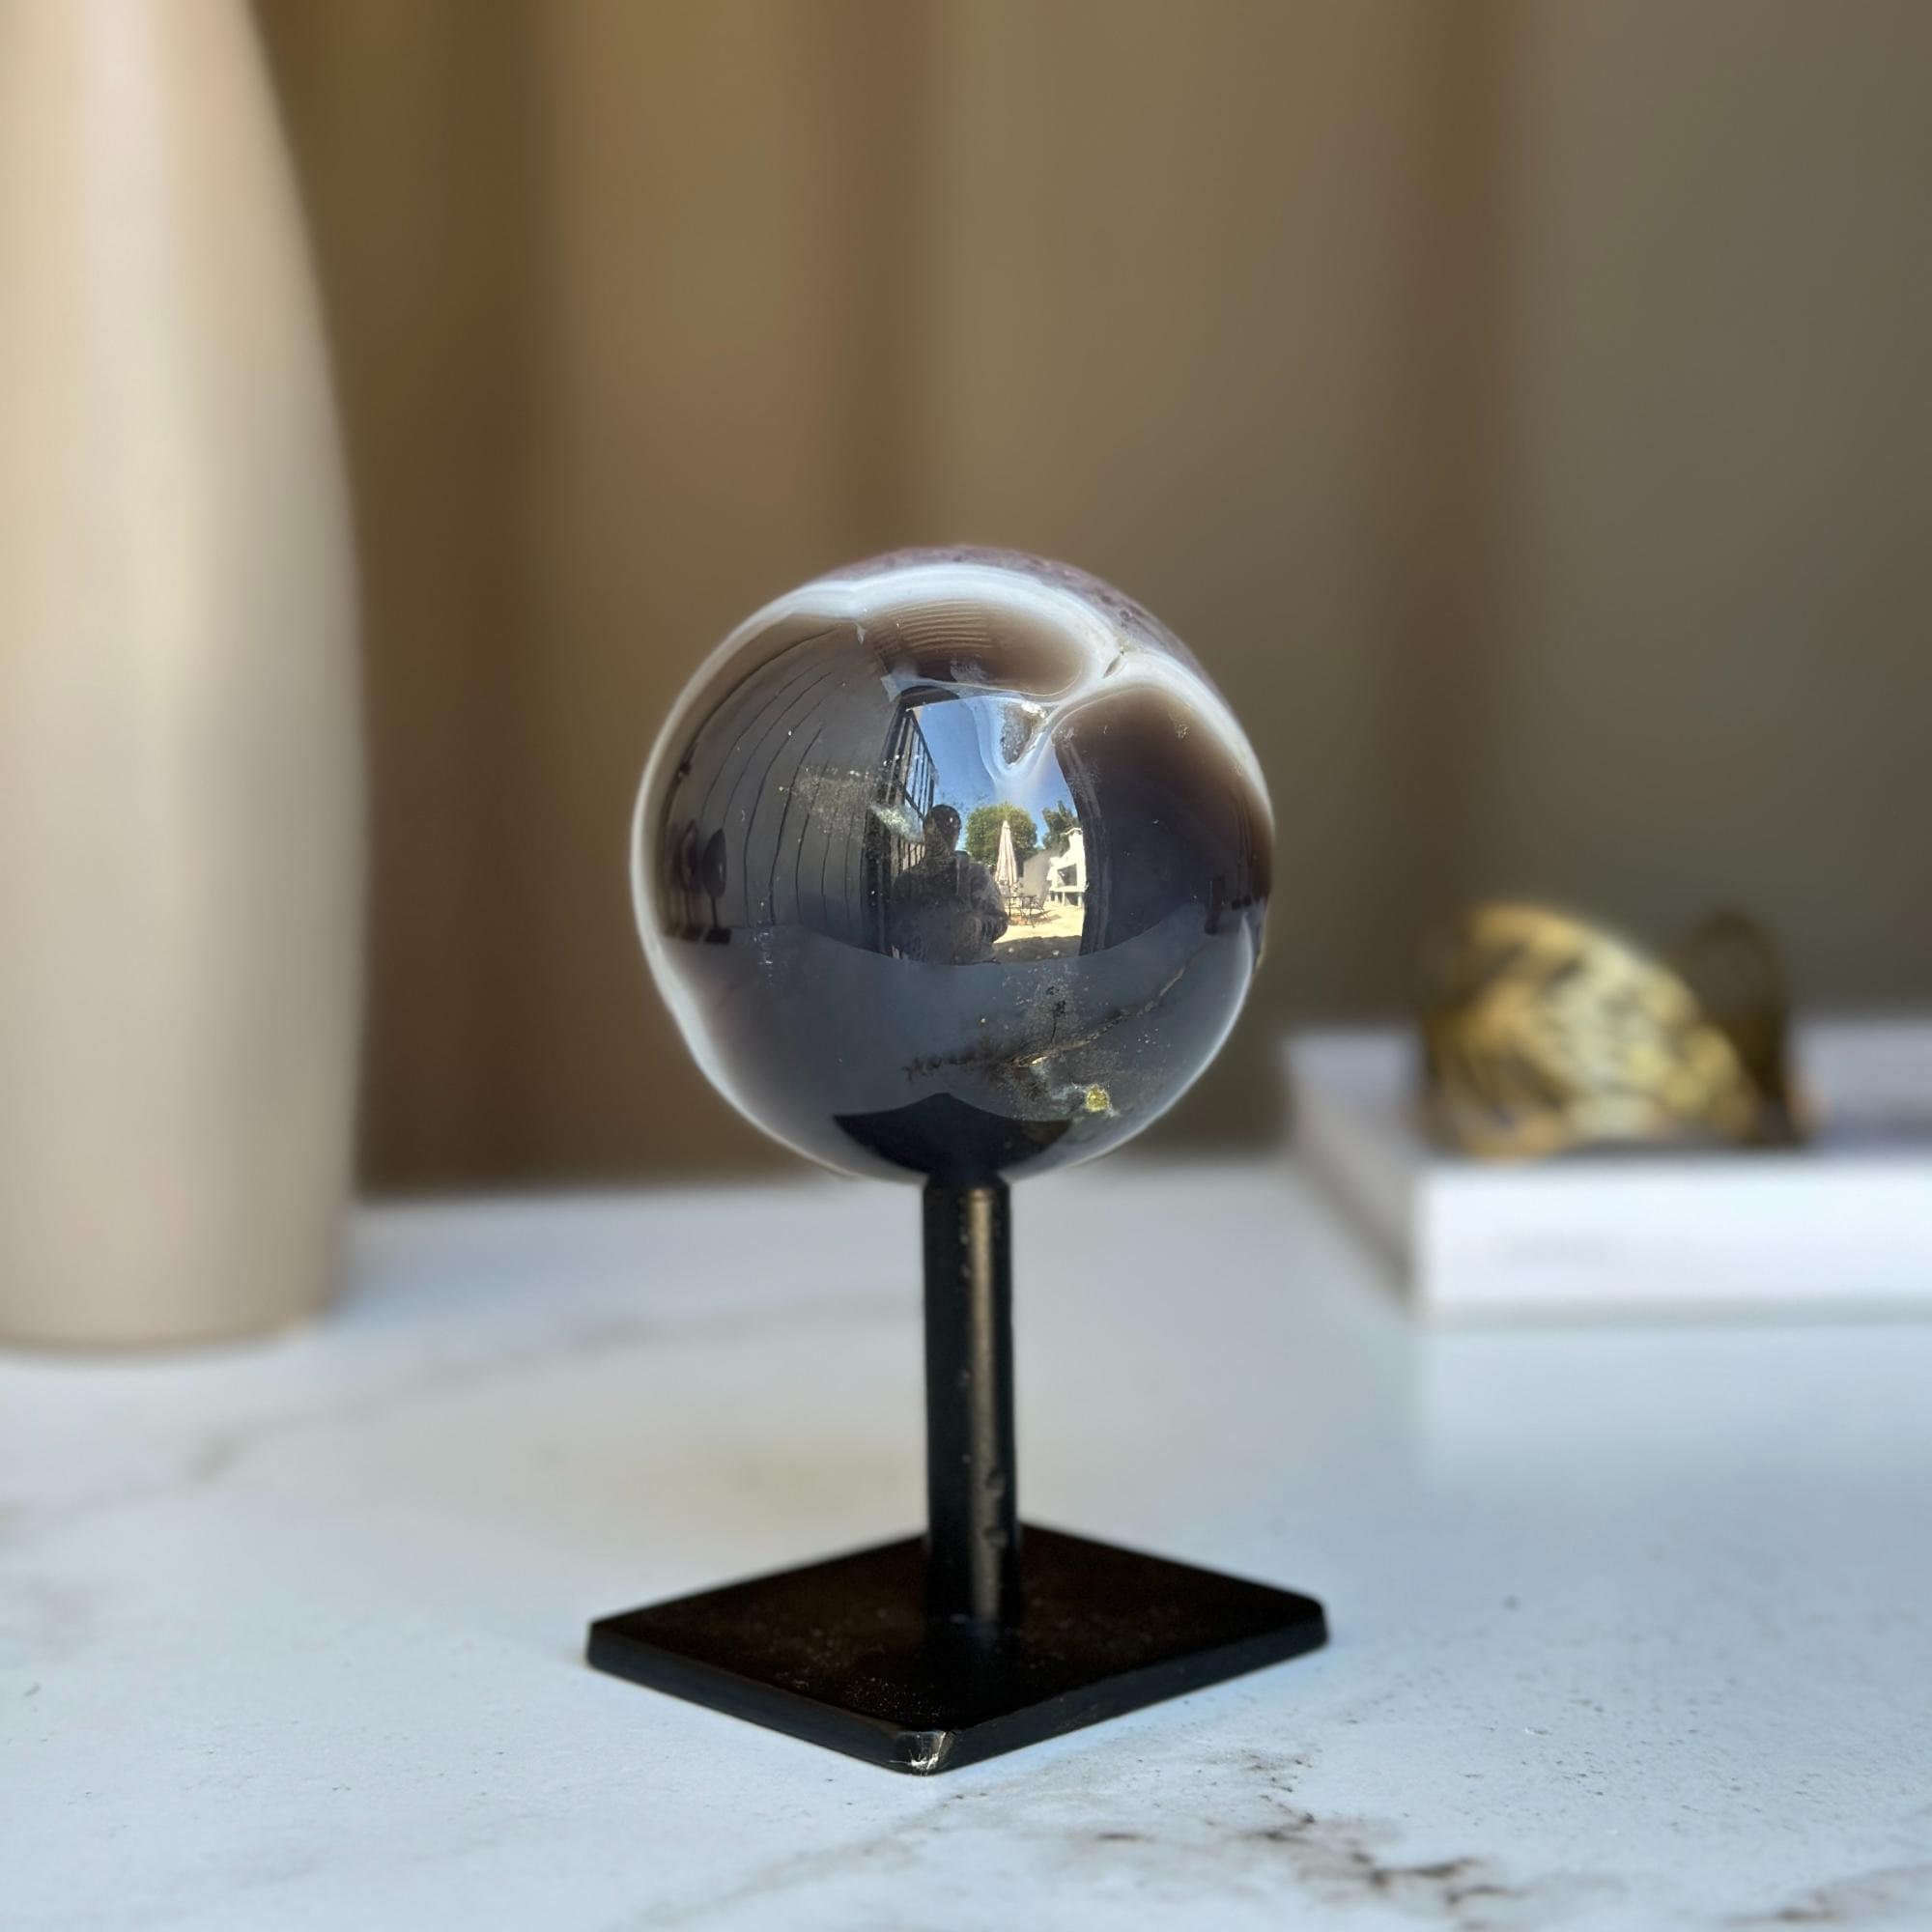 Sphere Amethyst Crystal on Stand, Crystal Ball in metallic base, Unique home decoration piece, one of a kind specimen